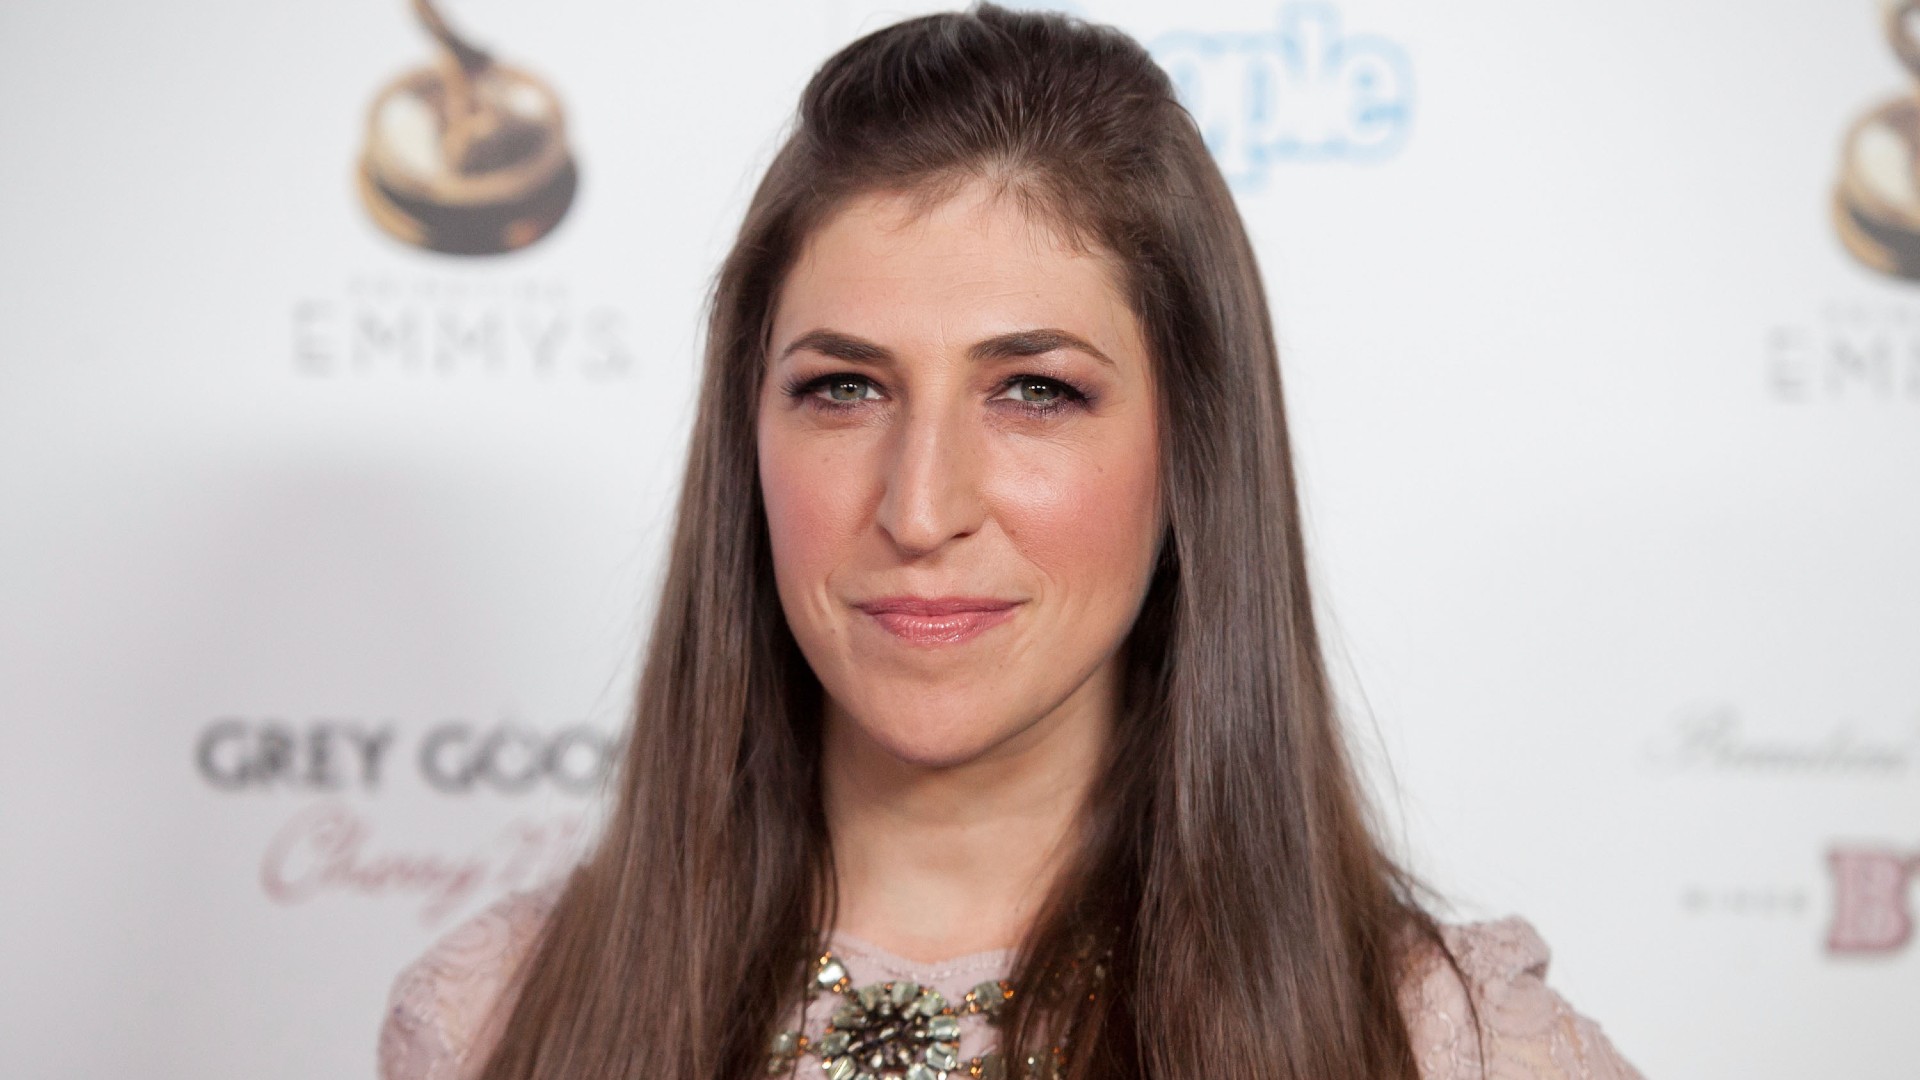 Jeopardy!’ host Mayim Bialik criticizes women’s groups for not speaking out against Hamas’ brutal treatment of women